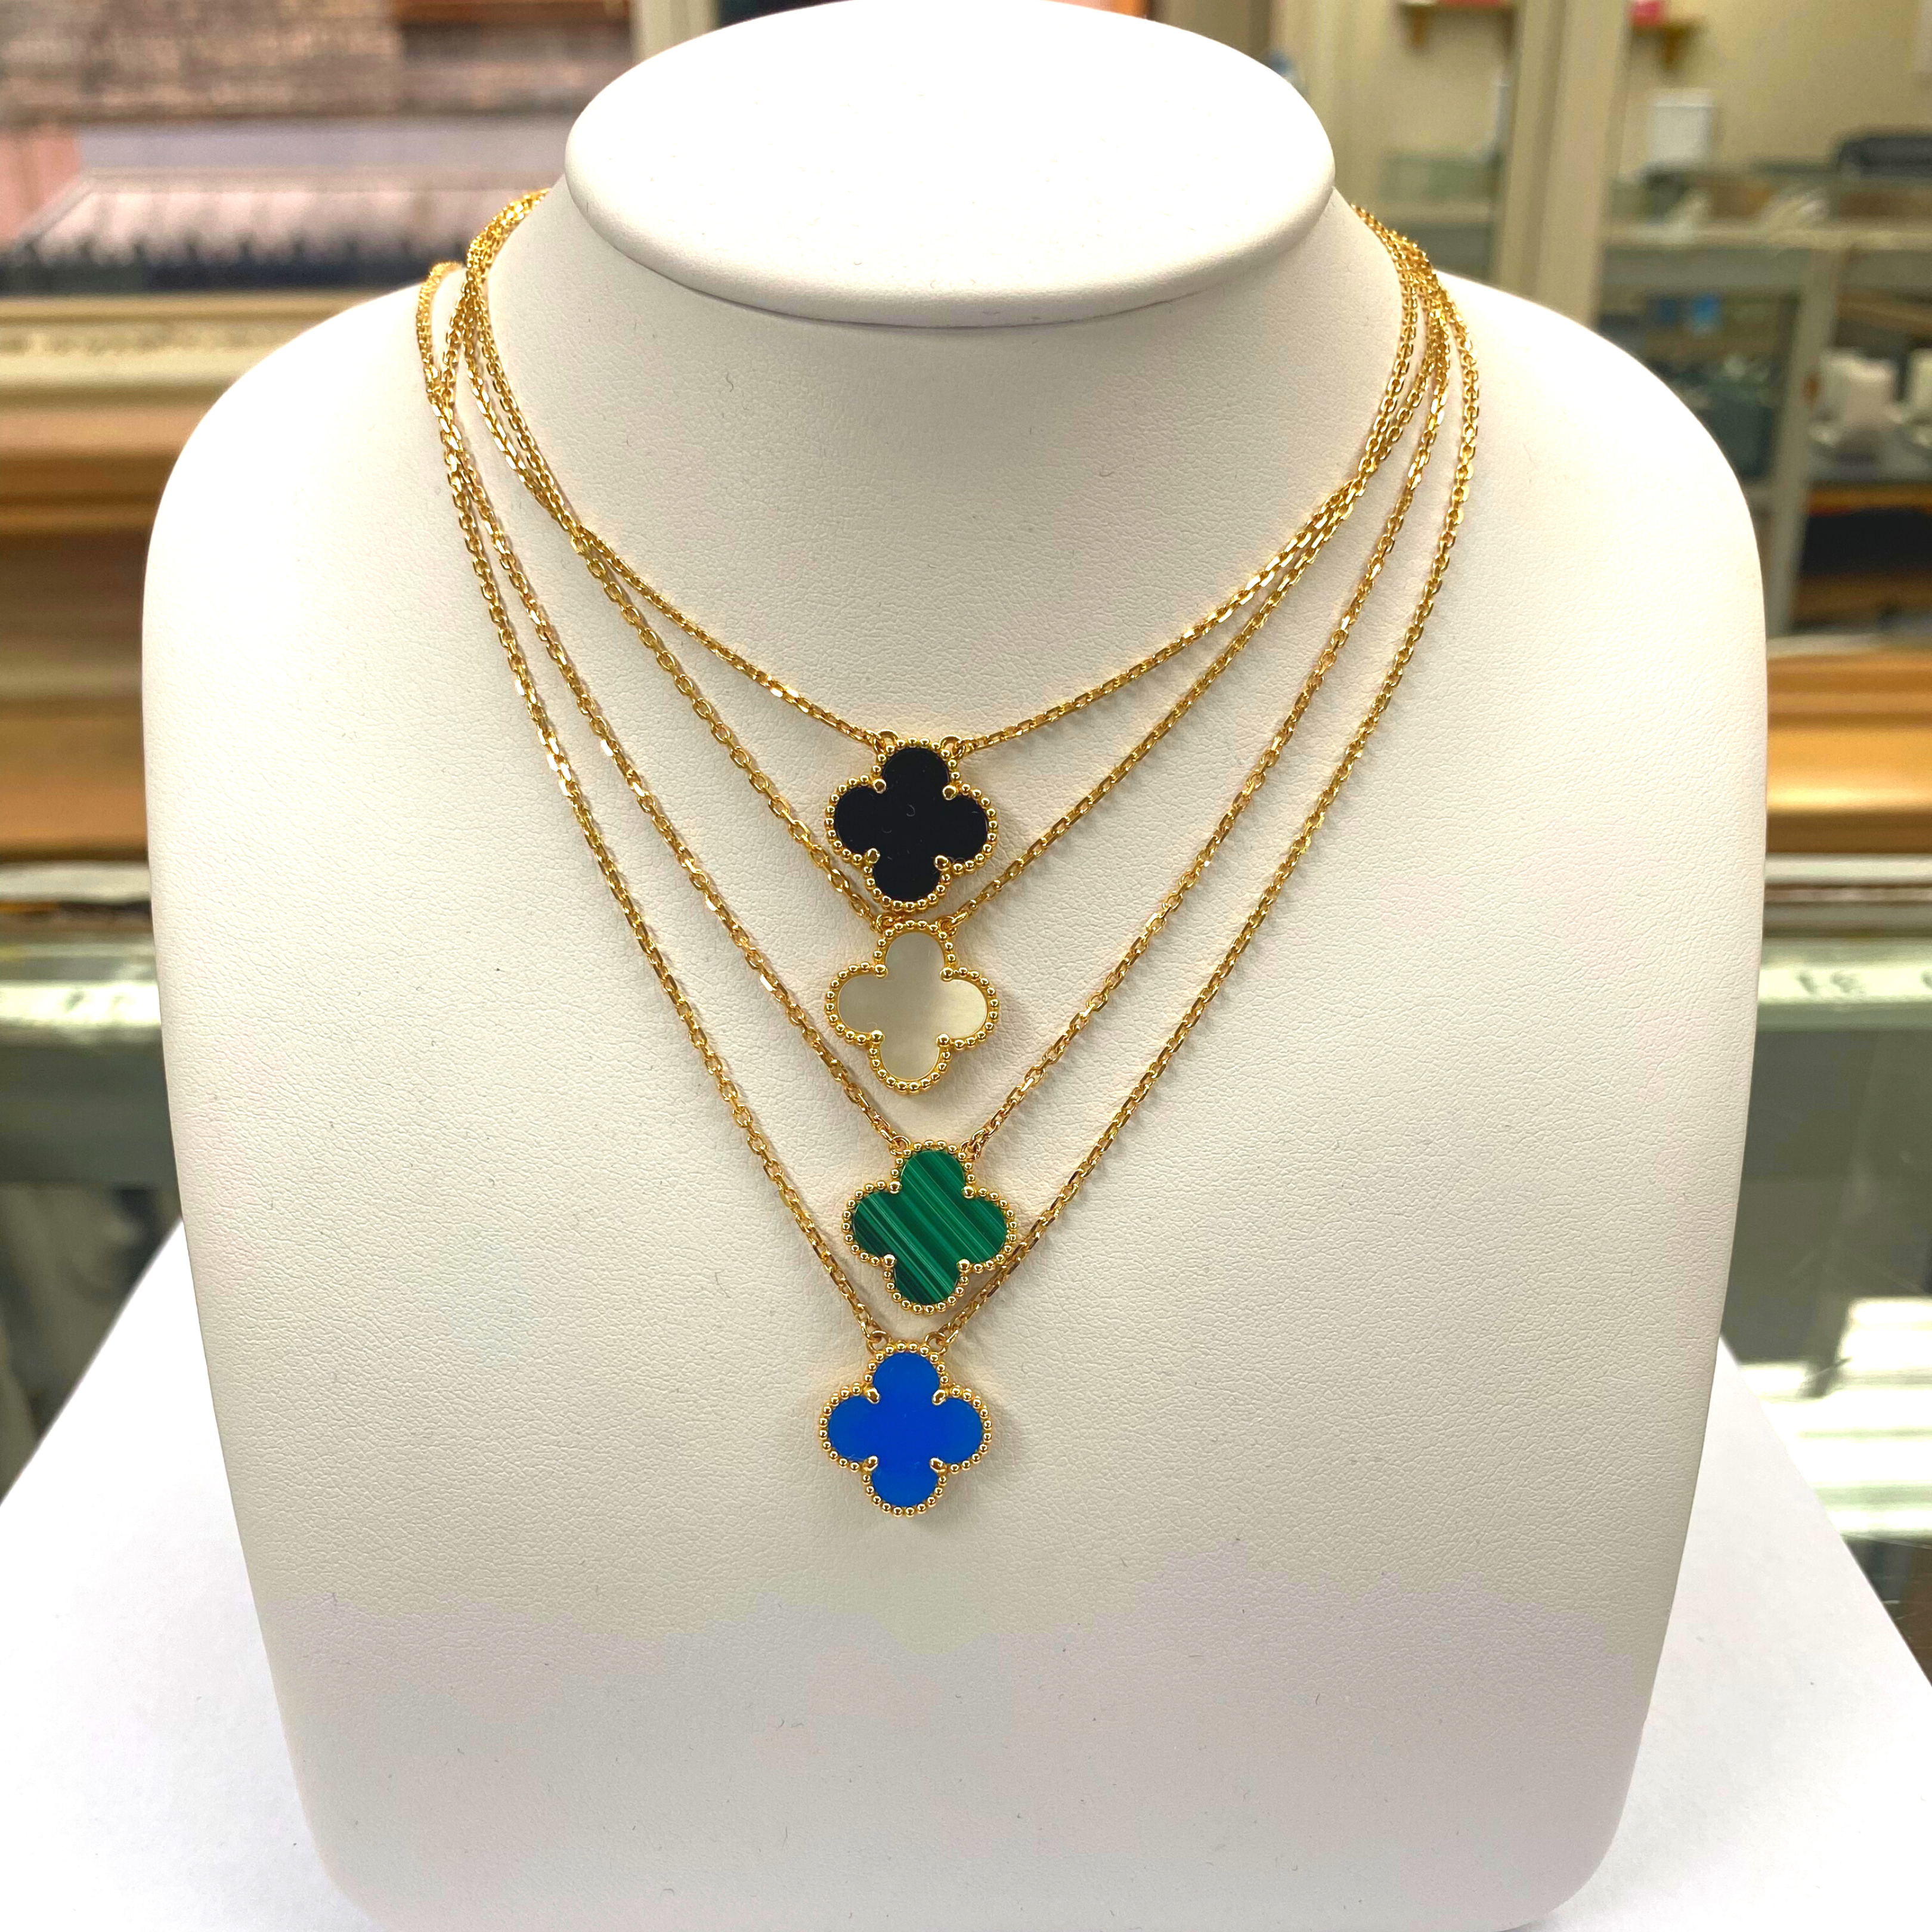 Van Cleef Designer Necklace Gold Pendant With 10 Four Leaf Diamonds Luxury  Classic Long Chain Aurate Jewelry For Women Titanium Silver Pated  Multicolor From Bracelet_shop, $7.8 | DHgate.Com